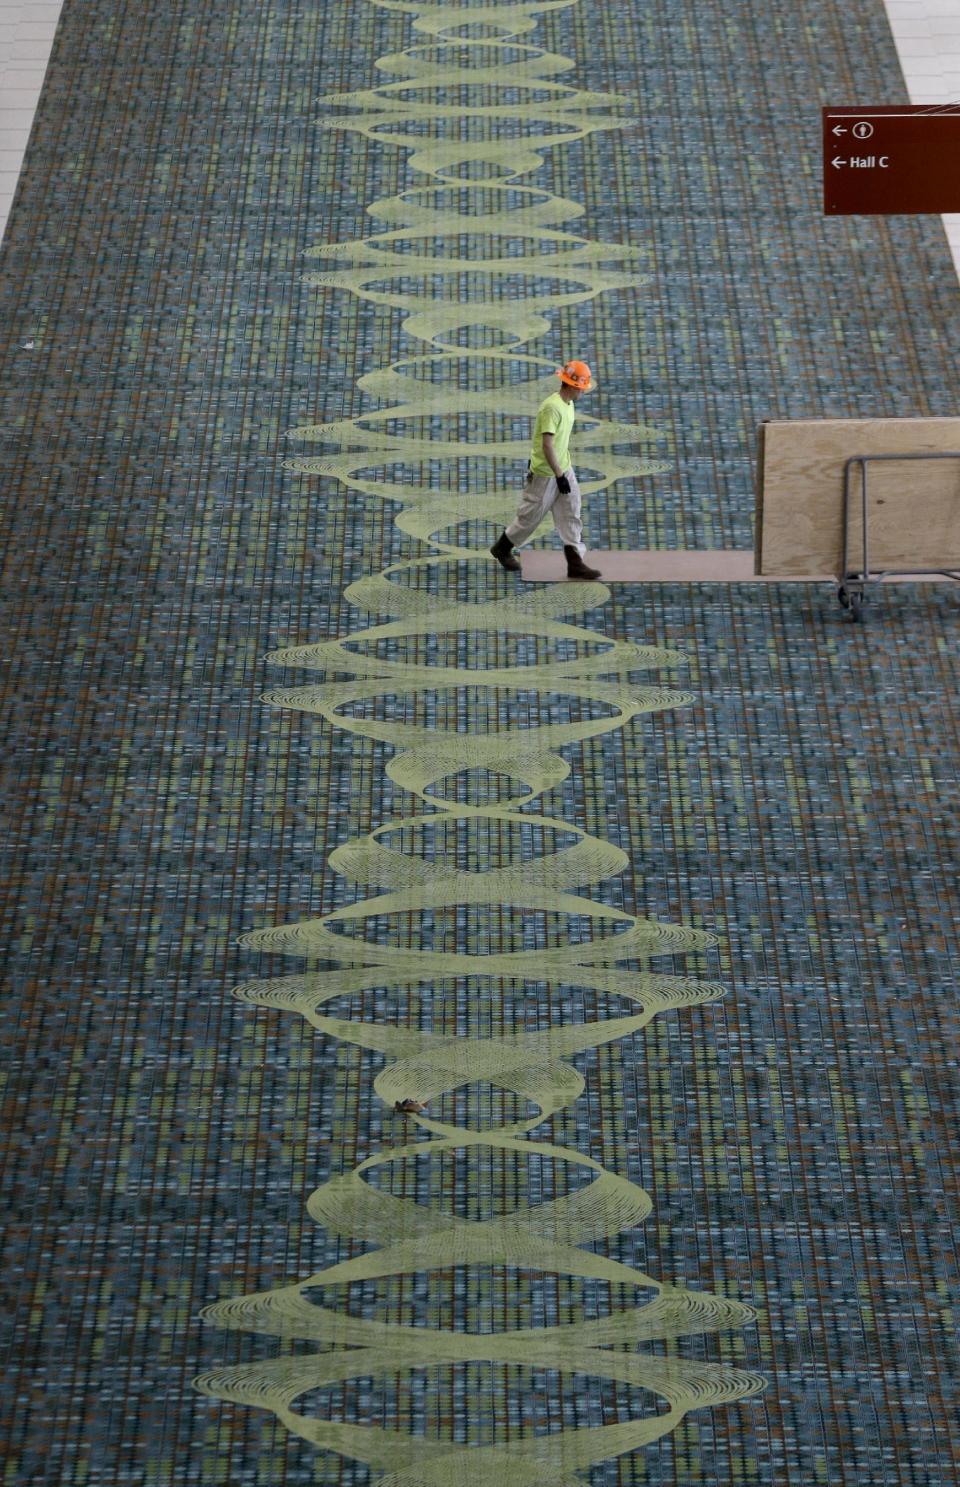 This April 12, 2013, photo shows carpet decorated with a sound wave in the Music City Center in Nashville, Tenn. Nashville's new convention center is transforming the look of downtown with its wavy roof dominating six city blocks, but tourism officials hope the eye-catching facility will also show business travelers a revitalized Music City. (A P Photo/Mark Humphrey)